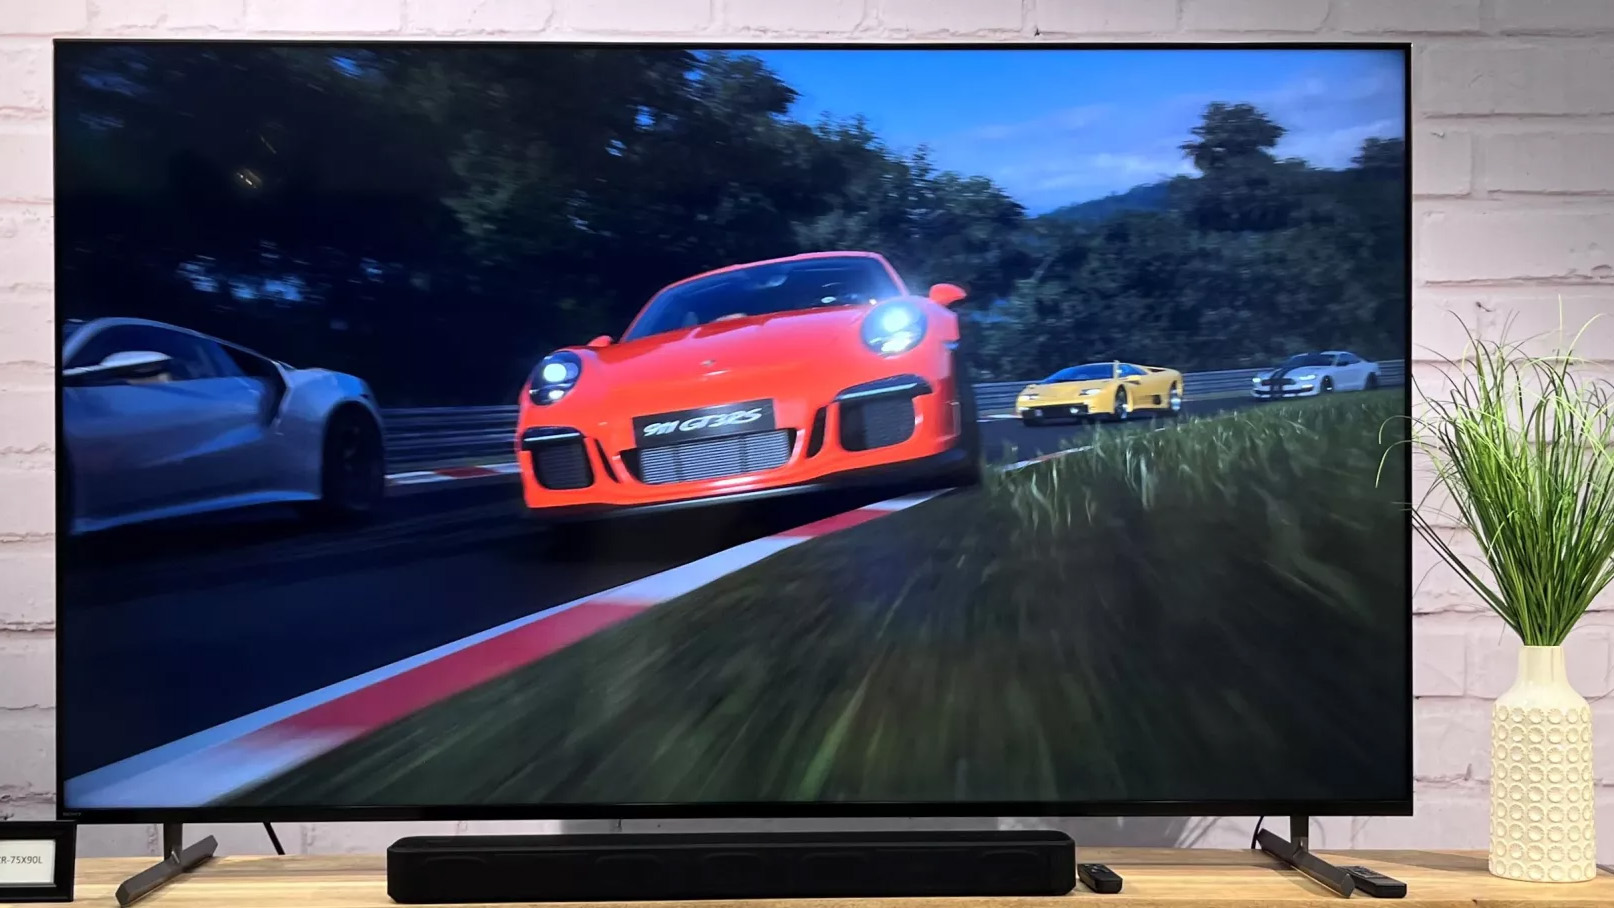 The Sony X90L LED TV pictured on a wooden shelf next to a plant displaying a game with a red car.